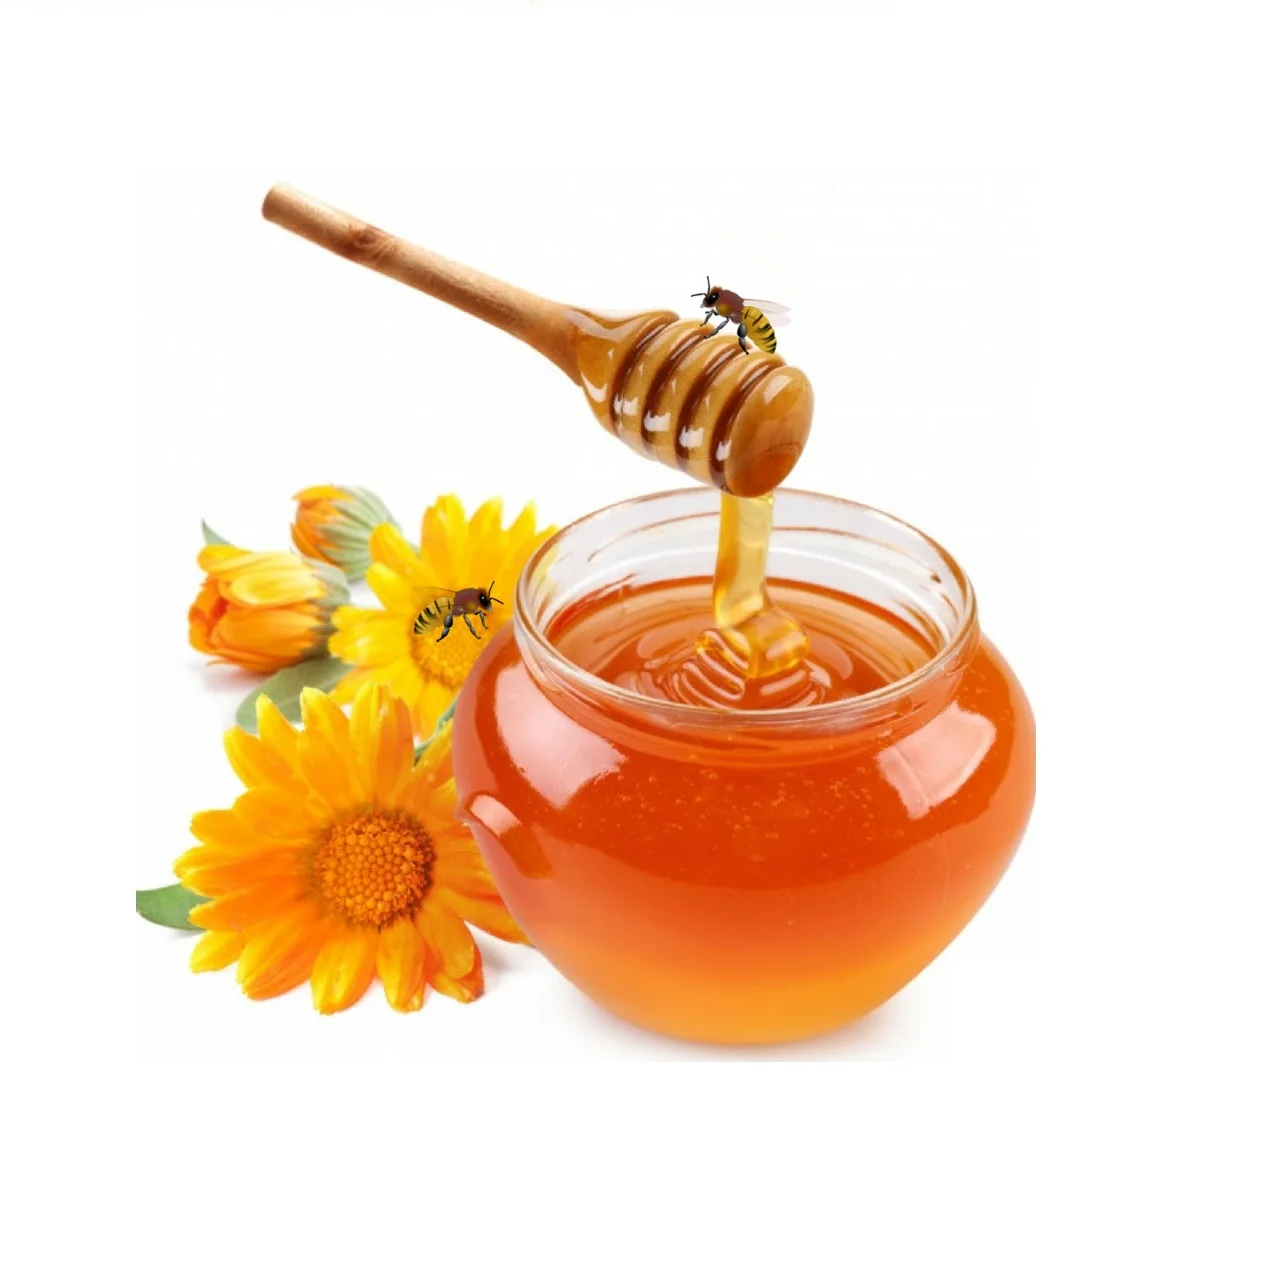 HONEY of the Best Quality, Natural Forest Good for Health and Beauty, Healthy and Sweet Without Artificial Sweeteners